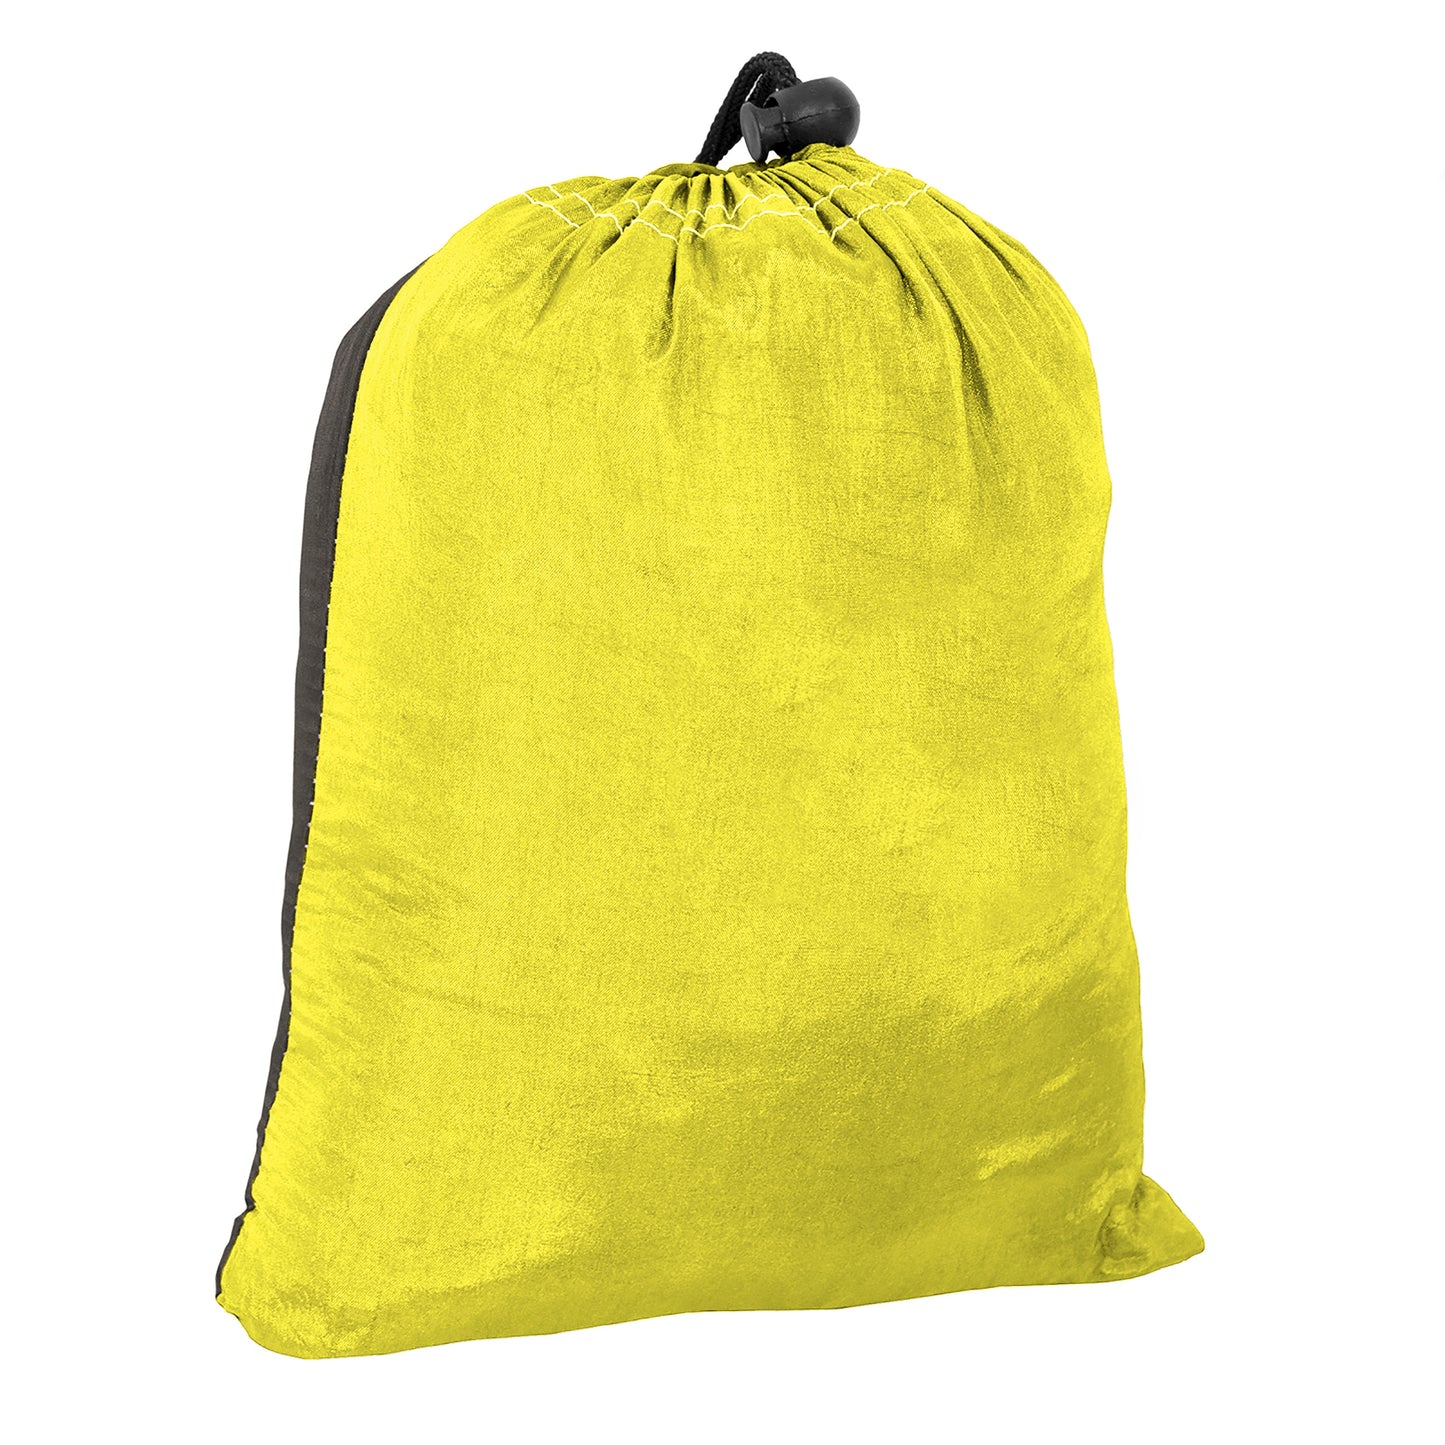 Best Choice Products Portable Nylon Parachute Hammock w/ Attached Stuff Sack- Yellow